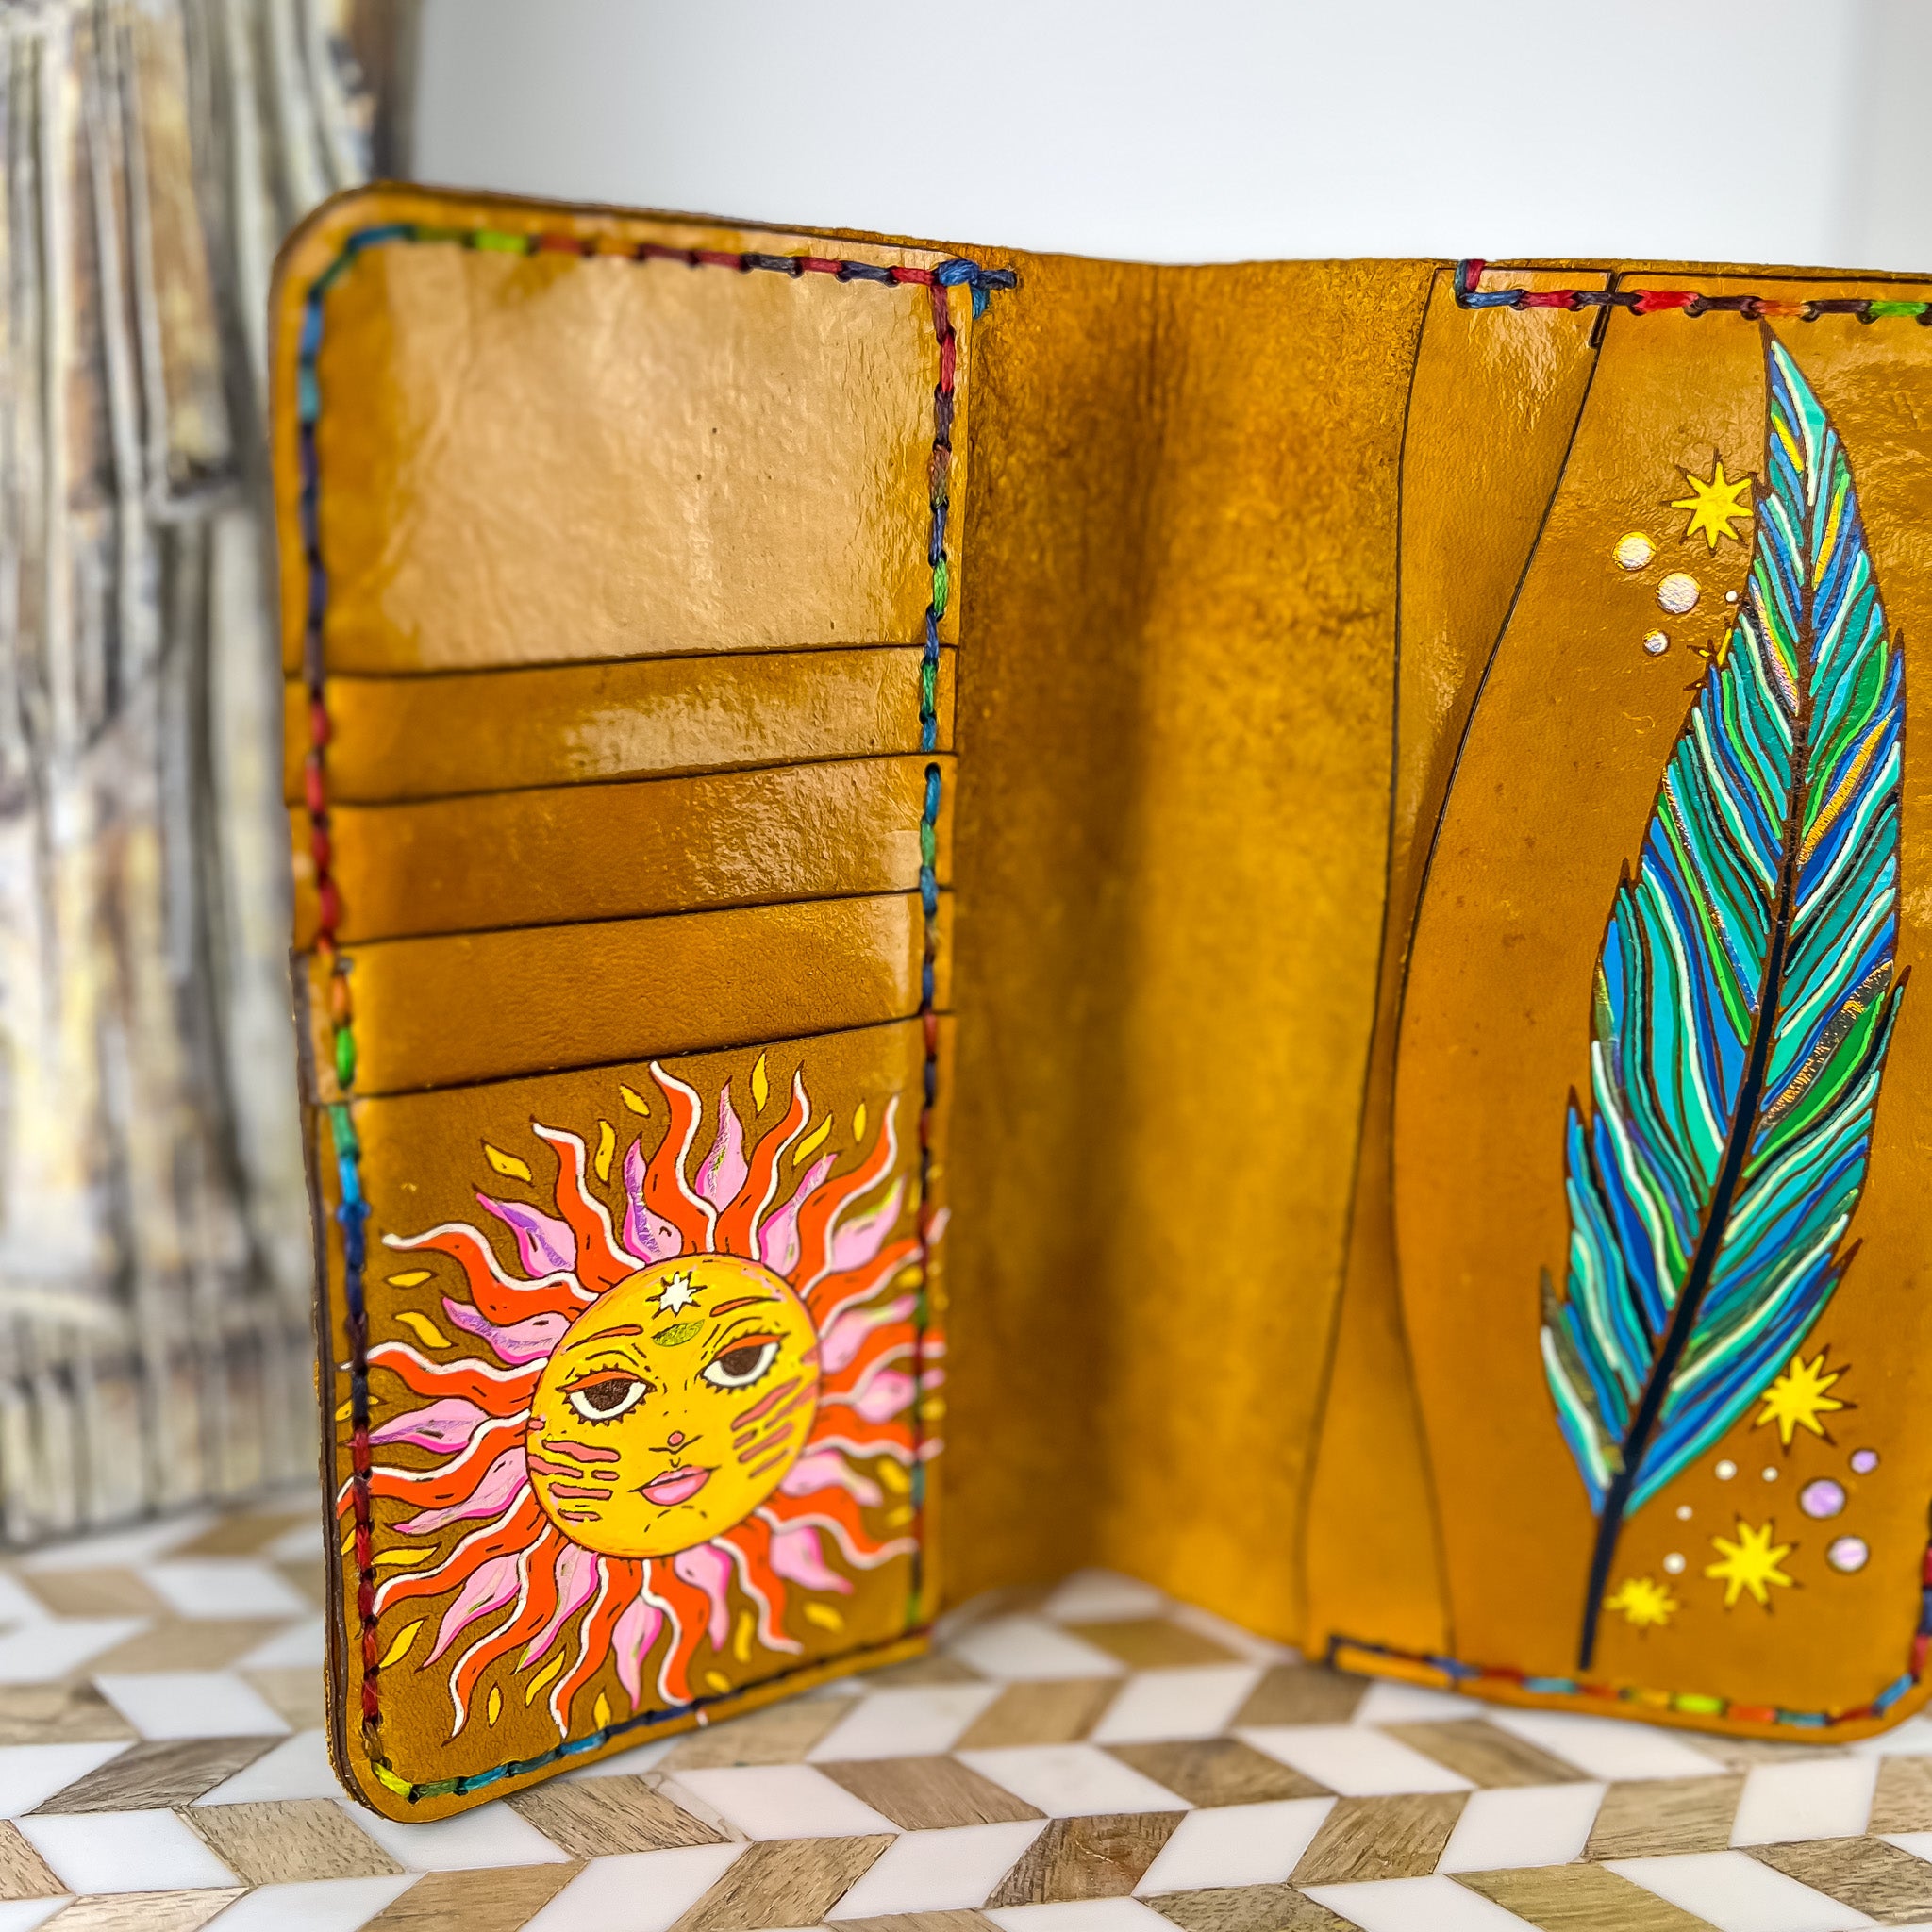 Women's Hand Painted Leather Wallet